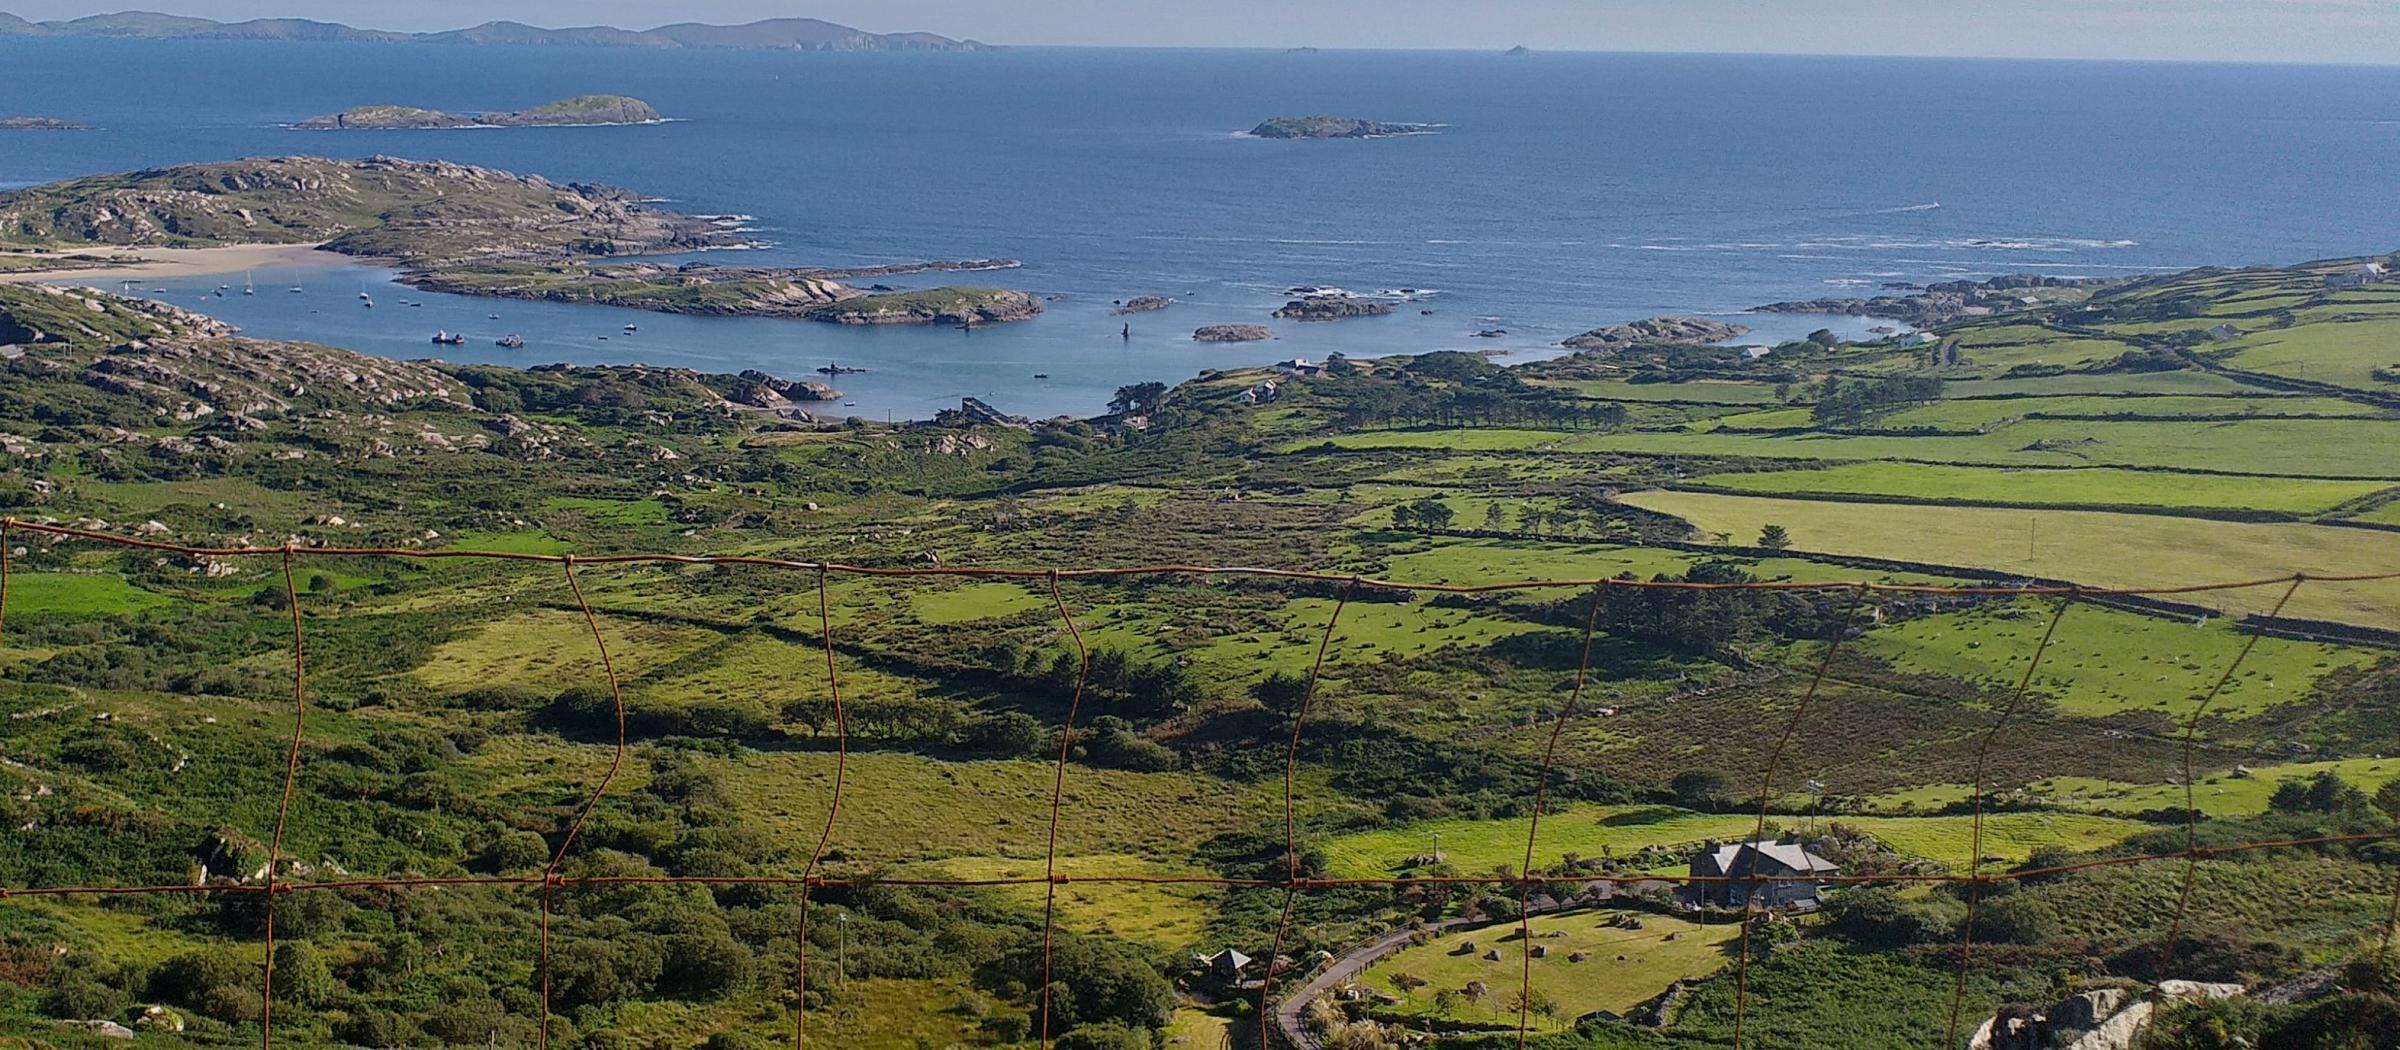 A view of the Kerry landscape and coastline